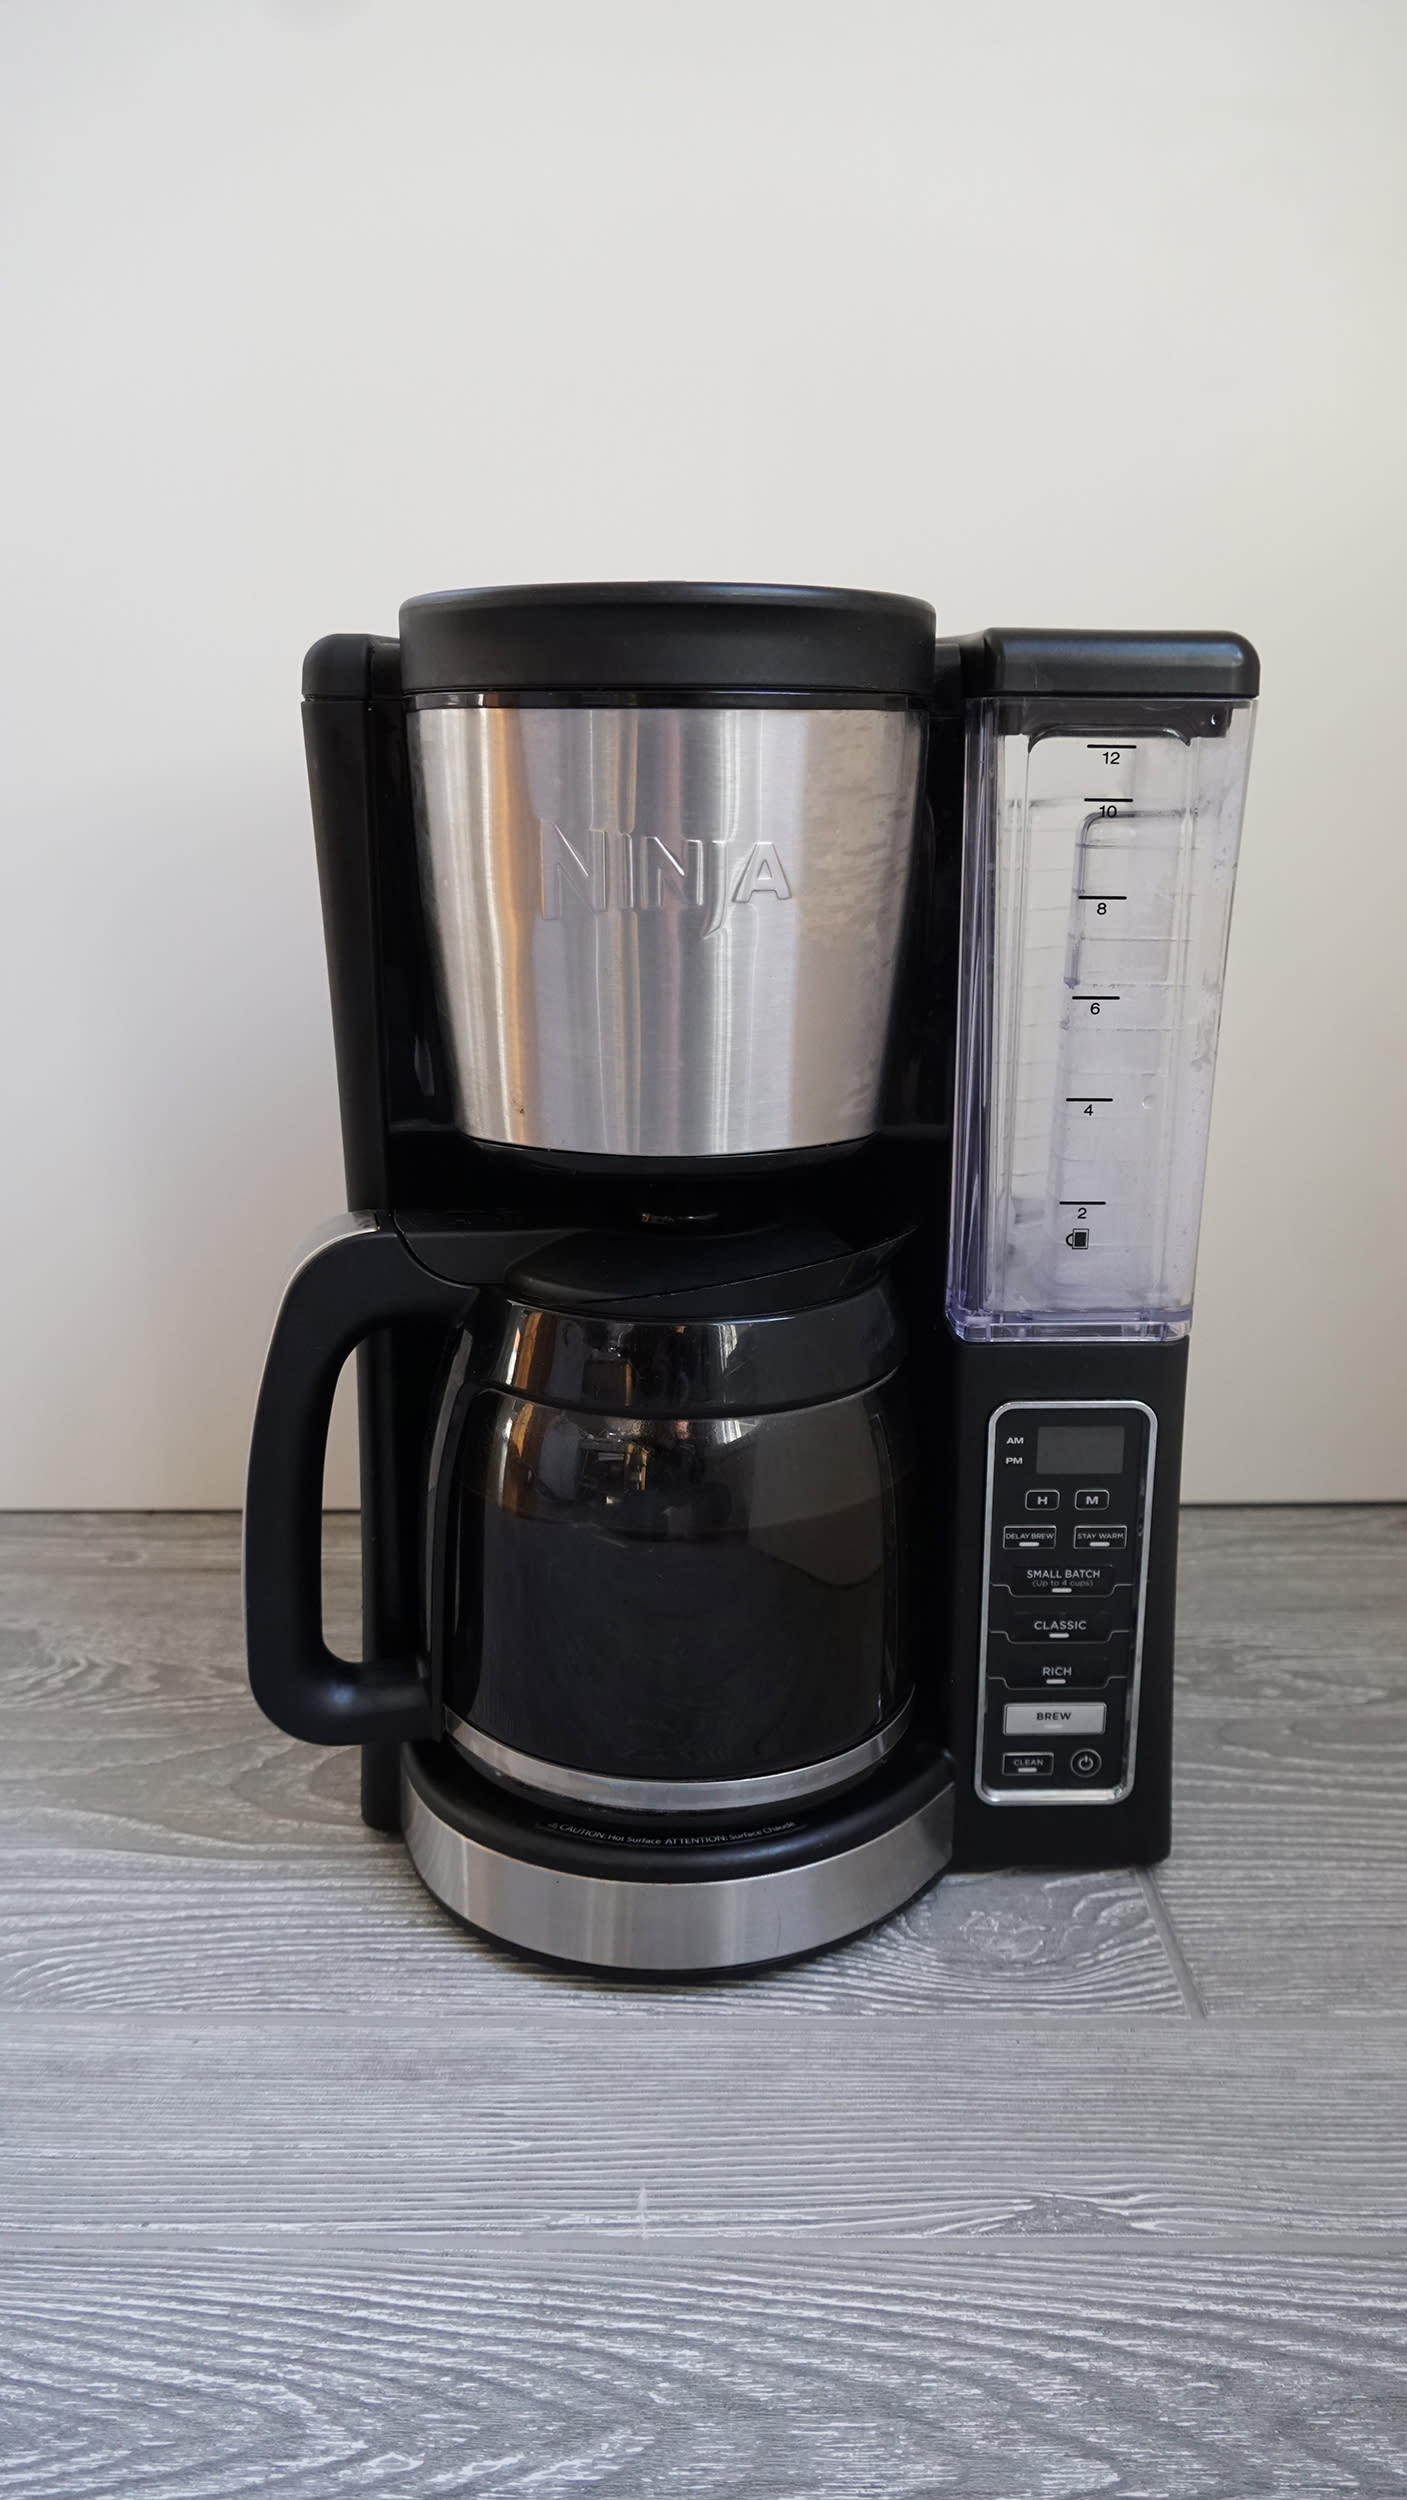 How to Brew Coffee in a Coffee Maker? 